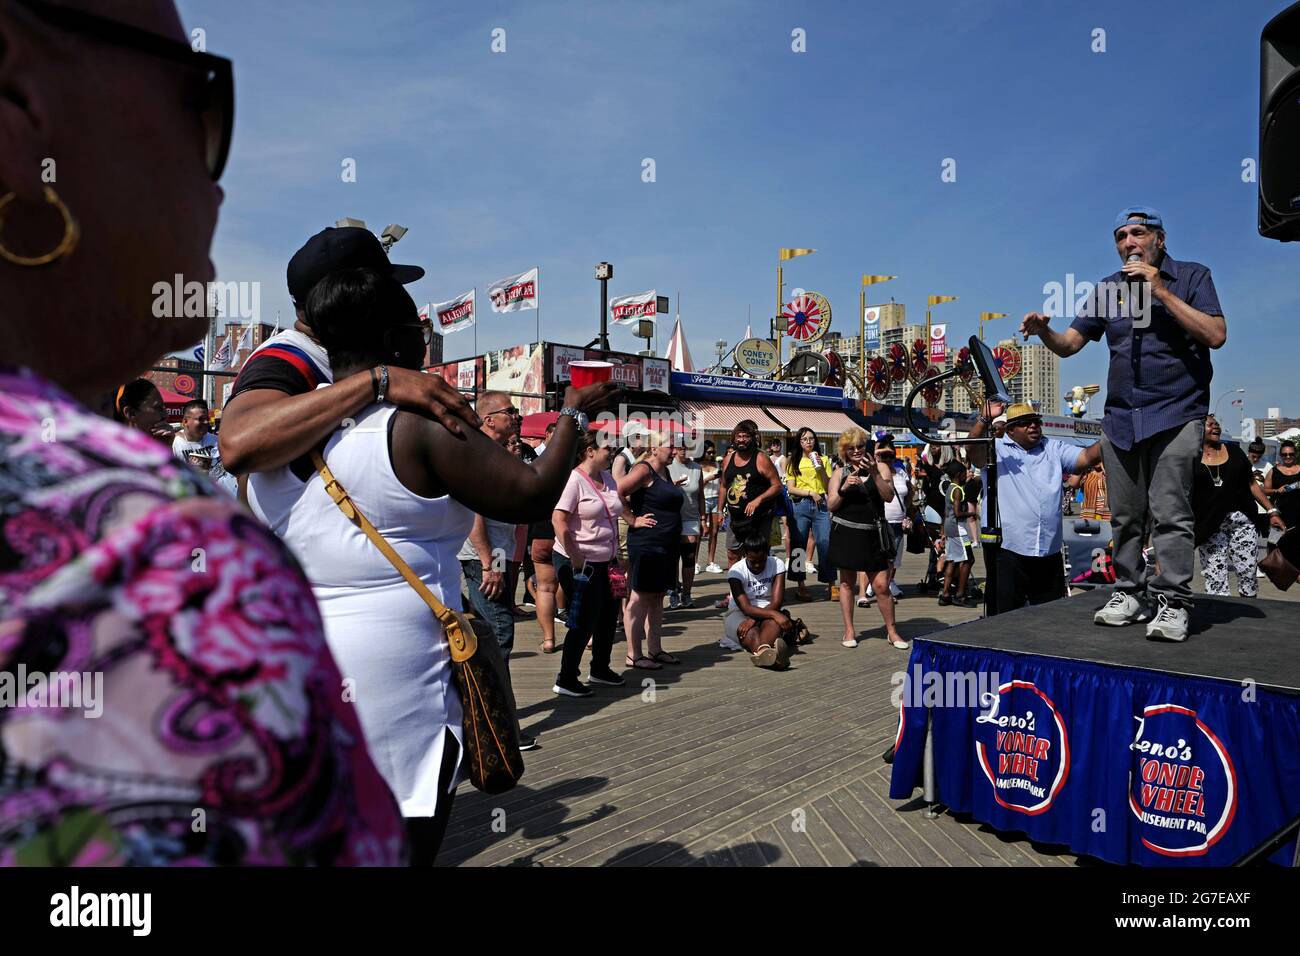 Karaoke singer on Coney Island boardwalk, during an hot summer's sunday afternoon, in New York City. Stock Photo